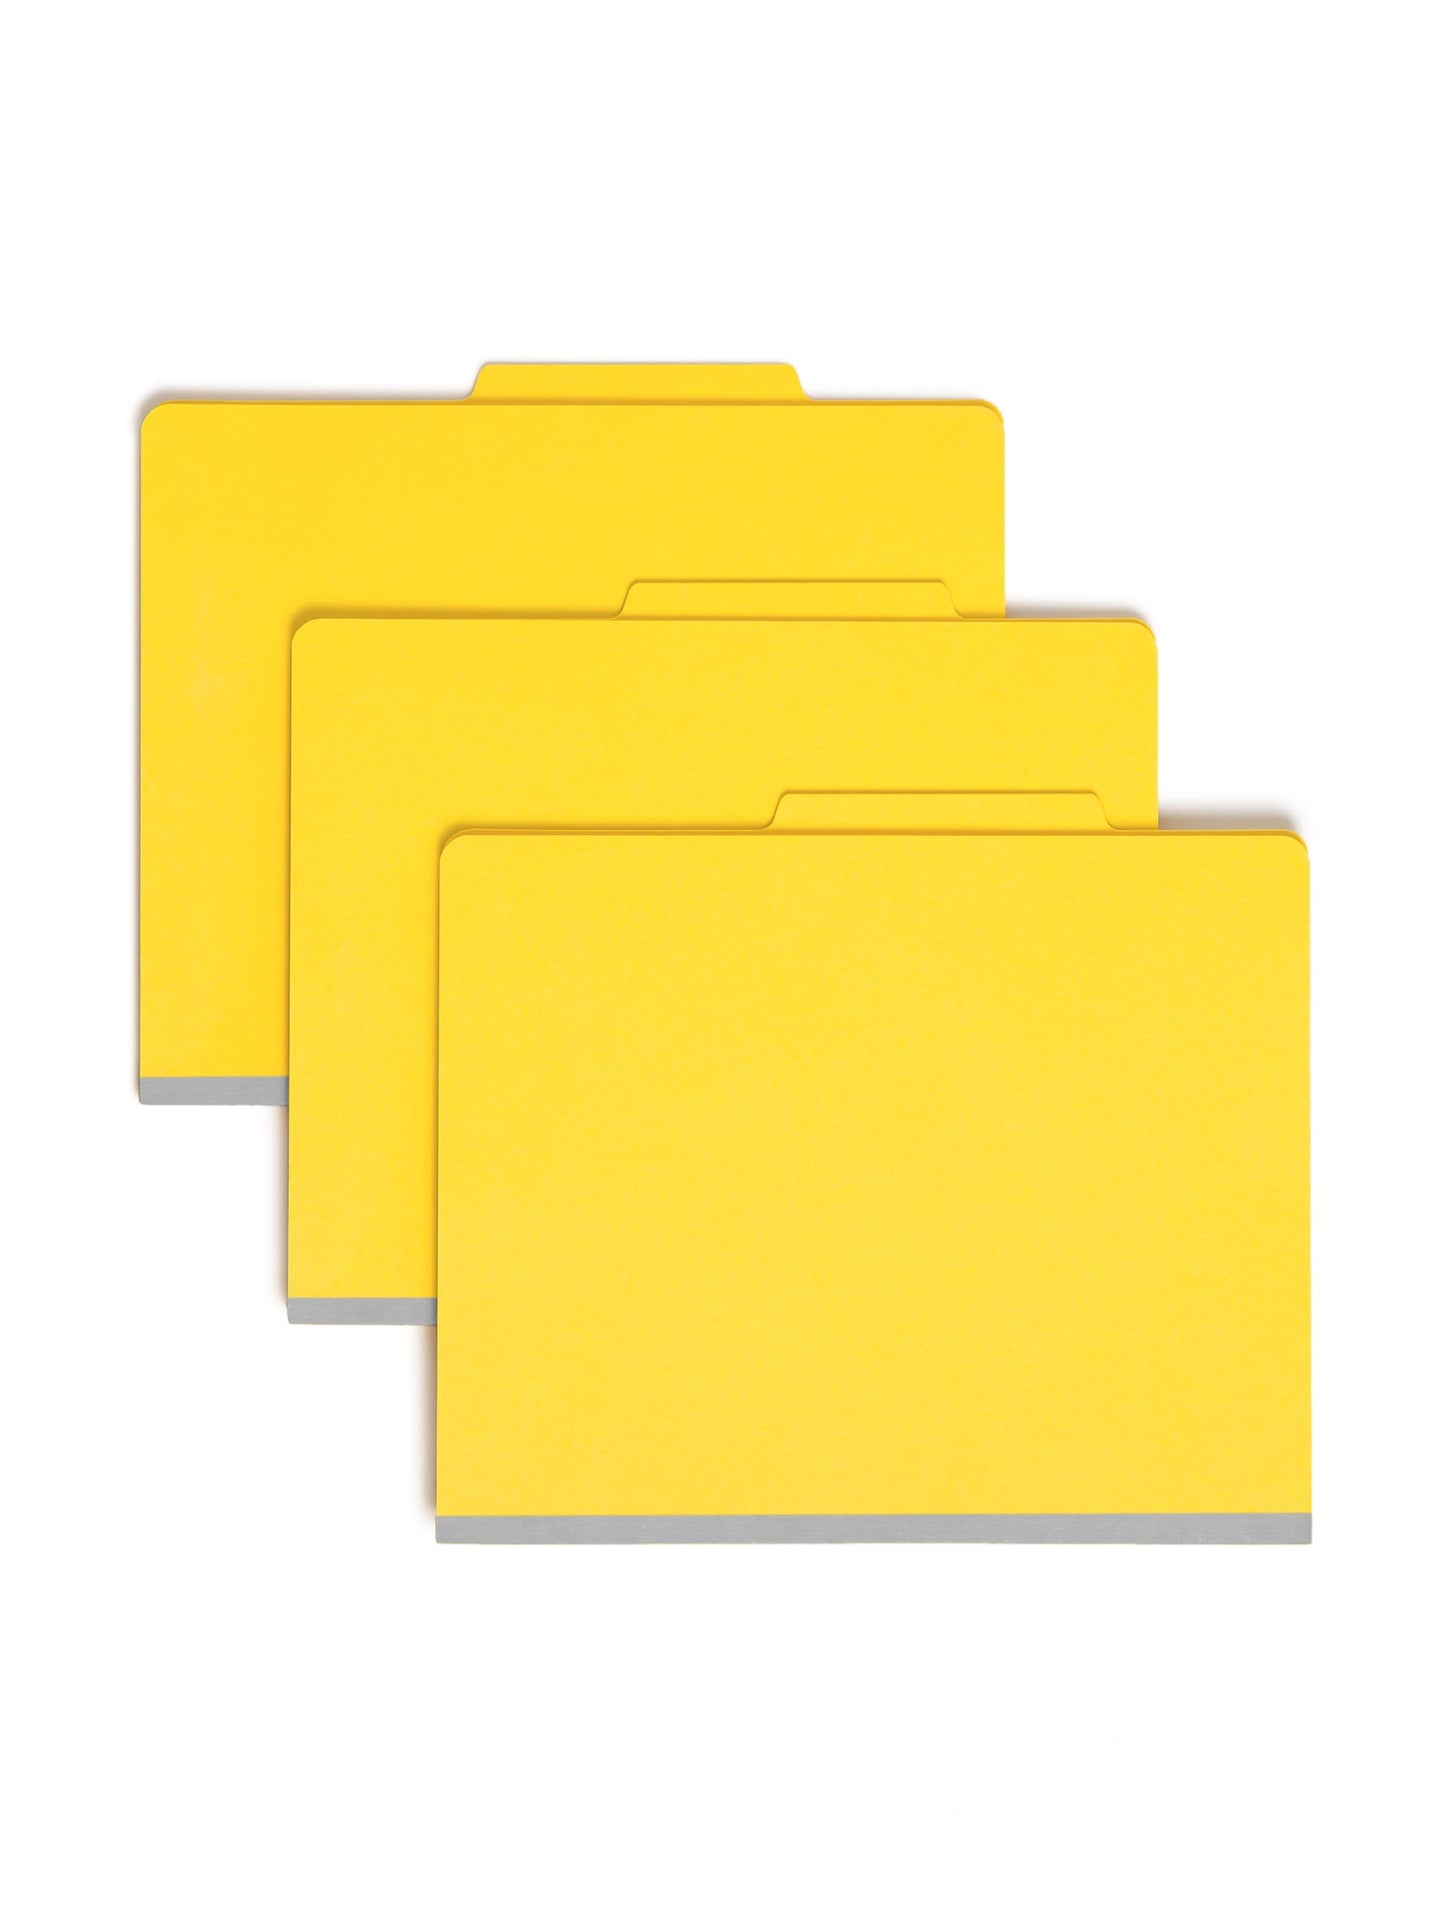 Classification File Folders, 2 Dividers, 2 inch Expansion, Yellow Color, Letter Size, Set of 0, 30086486140042